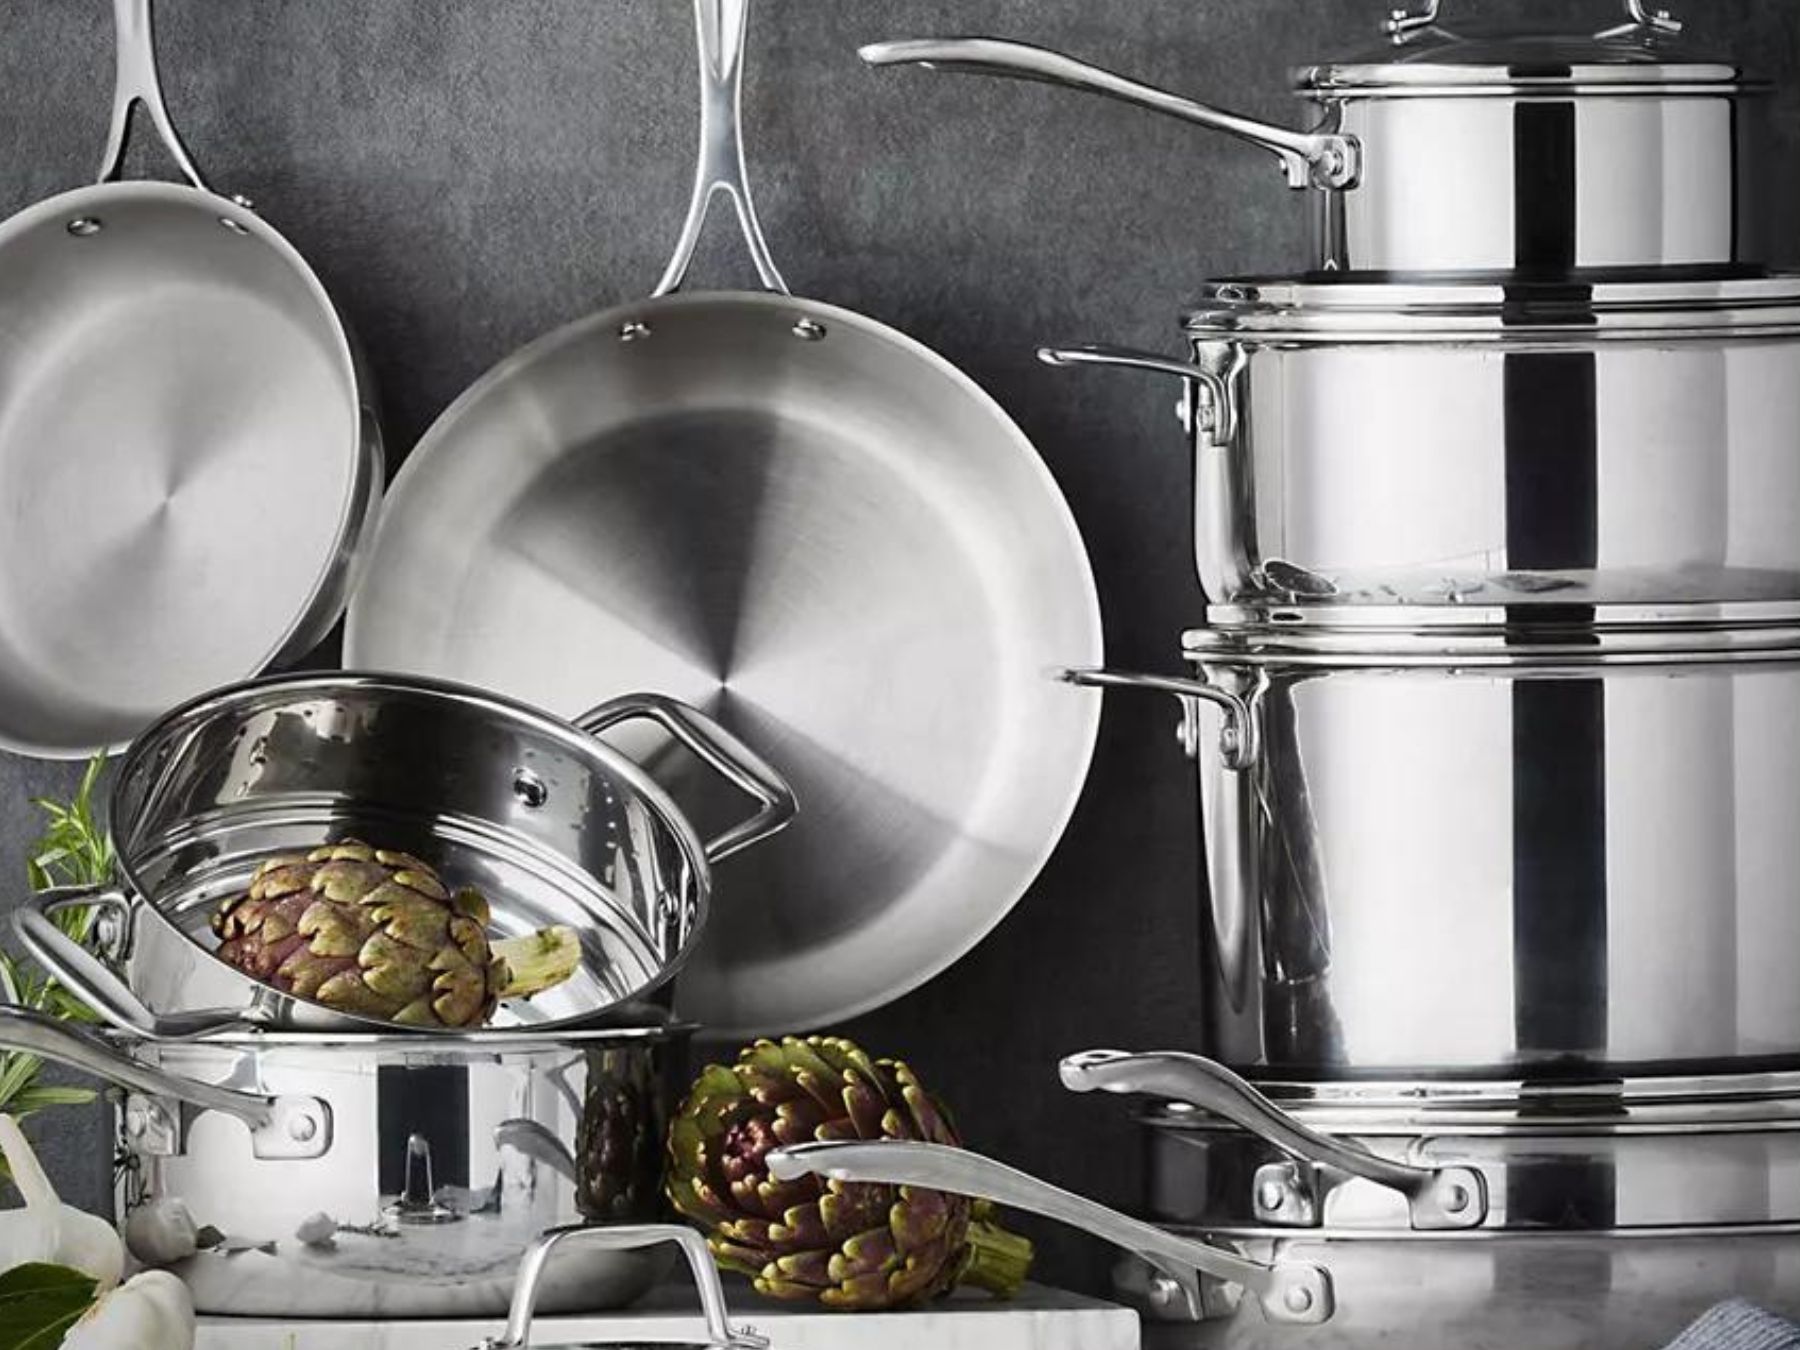 https://hip2save.com/wp-content/uploads/2023/01/Members-Mark-14-Piece-Tri-Ply-Cookware-Set.jpg?resize=1800%2C1350&strip=all